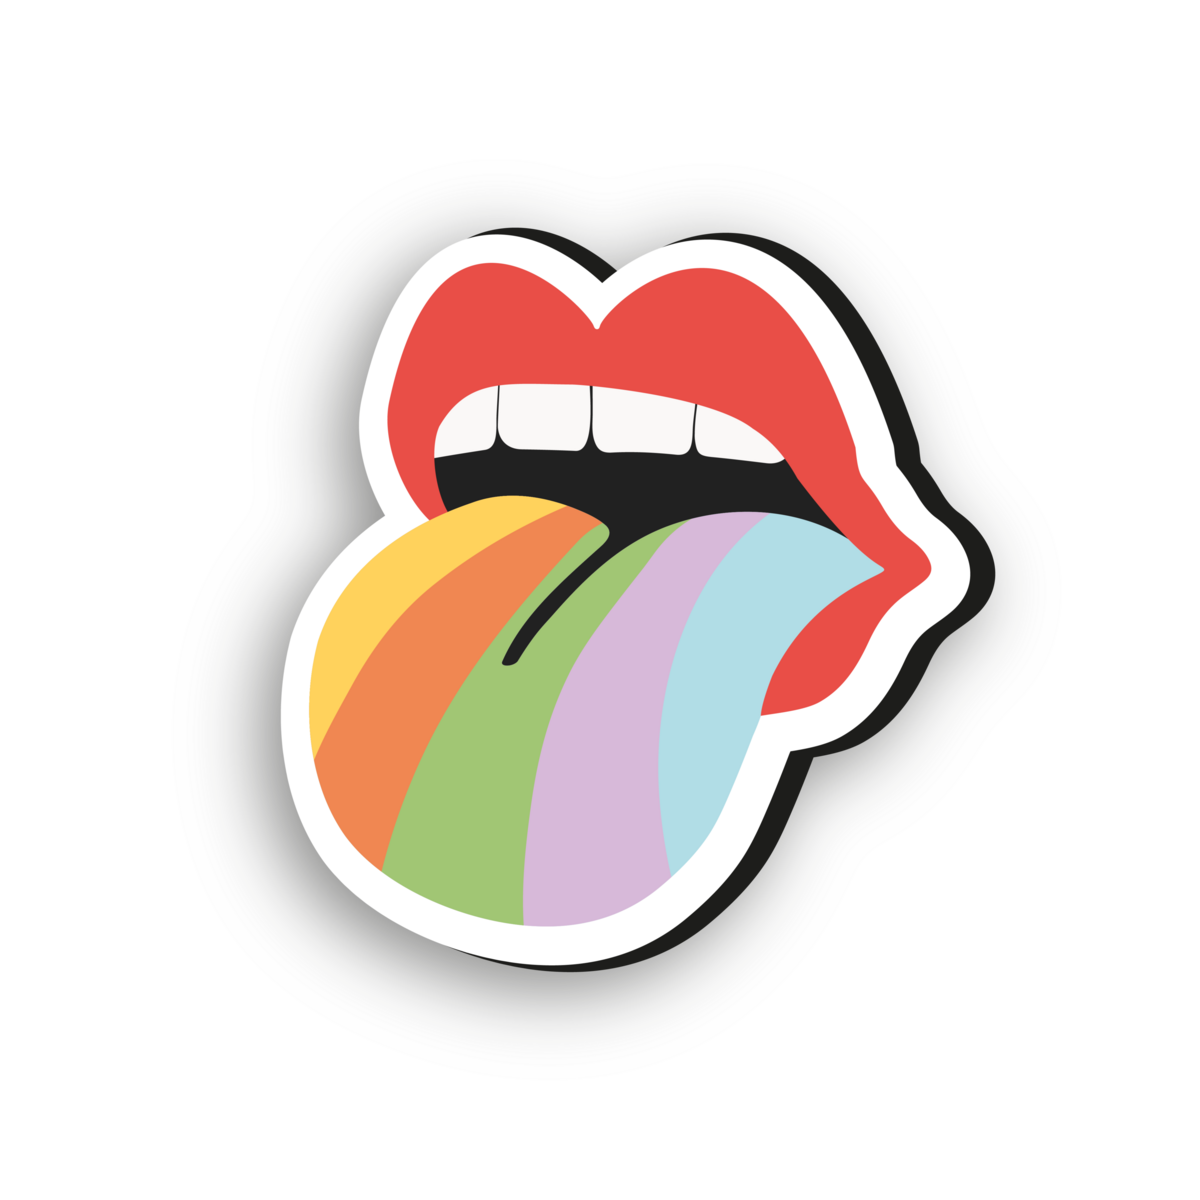 Lips with colourful tongue poking out logo